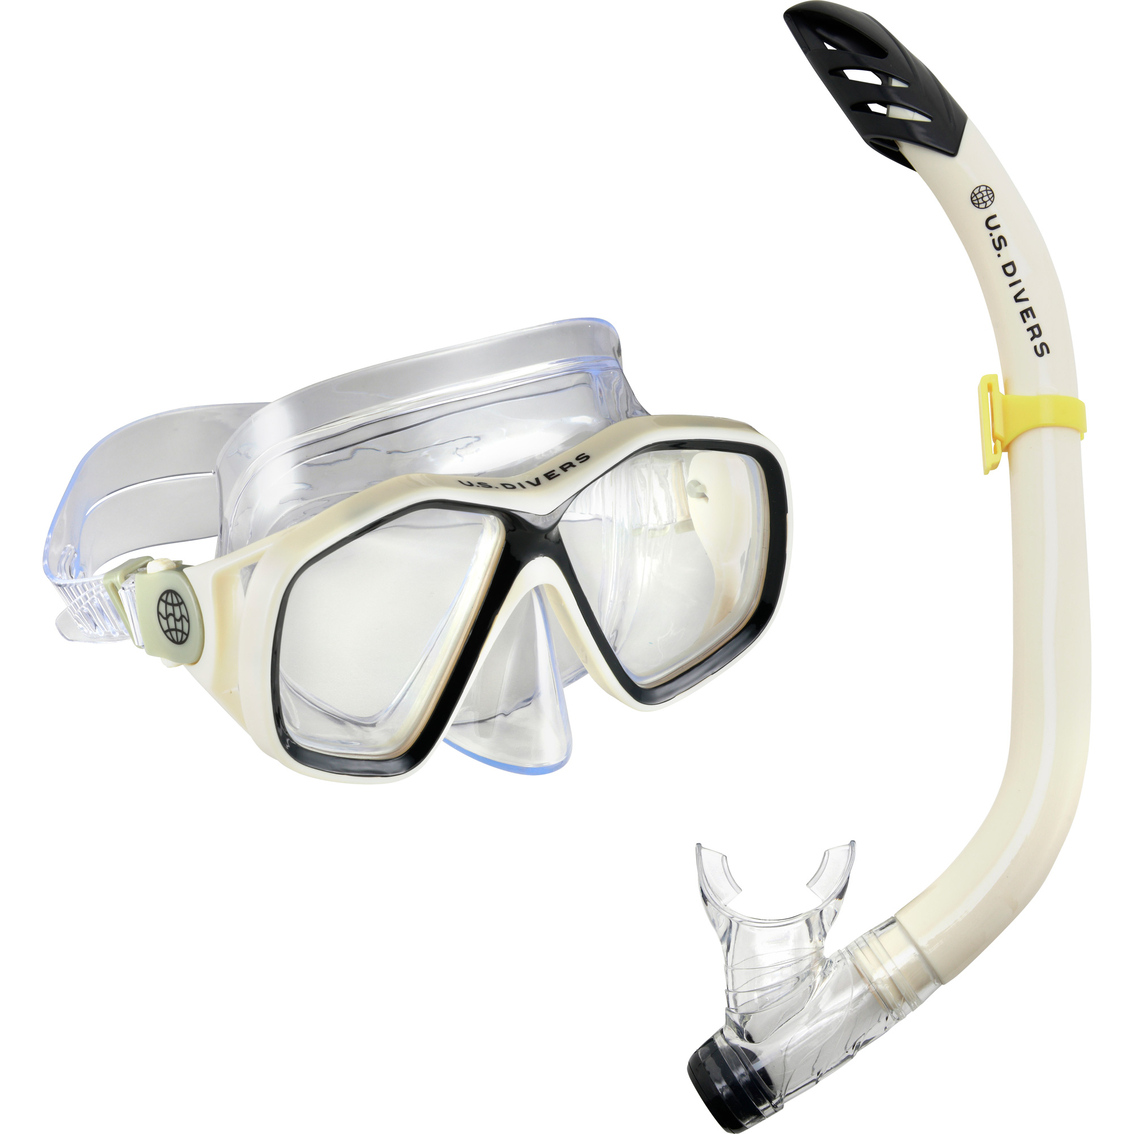 US Divers Redondo DX Snorkeling Combo., Beige and Black - Image 1 of 4